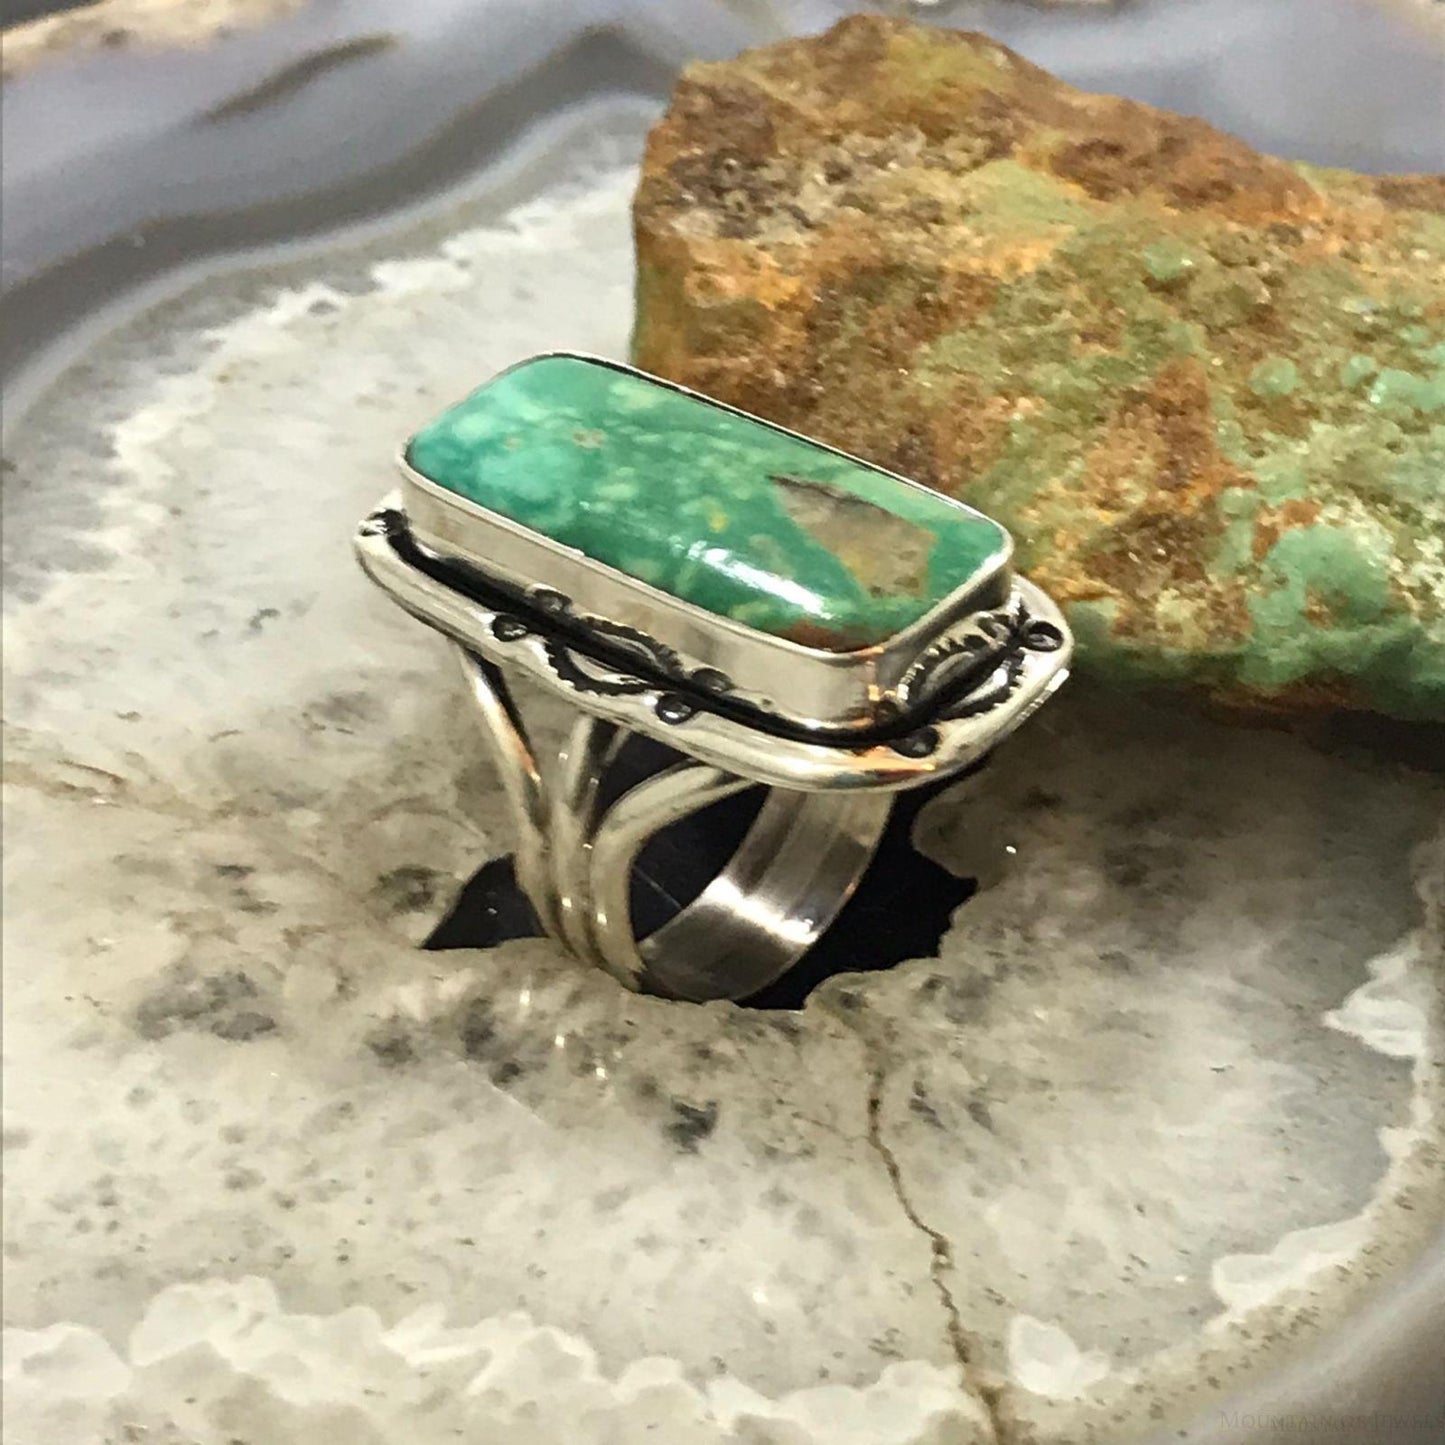 Native American Sterling Silver Turquoise Bar Ring Size 9 For Women